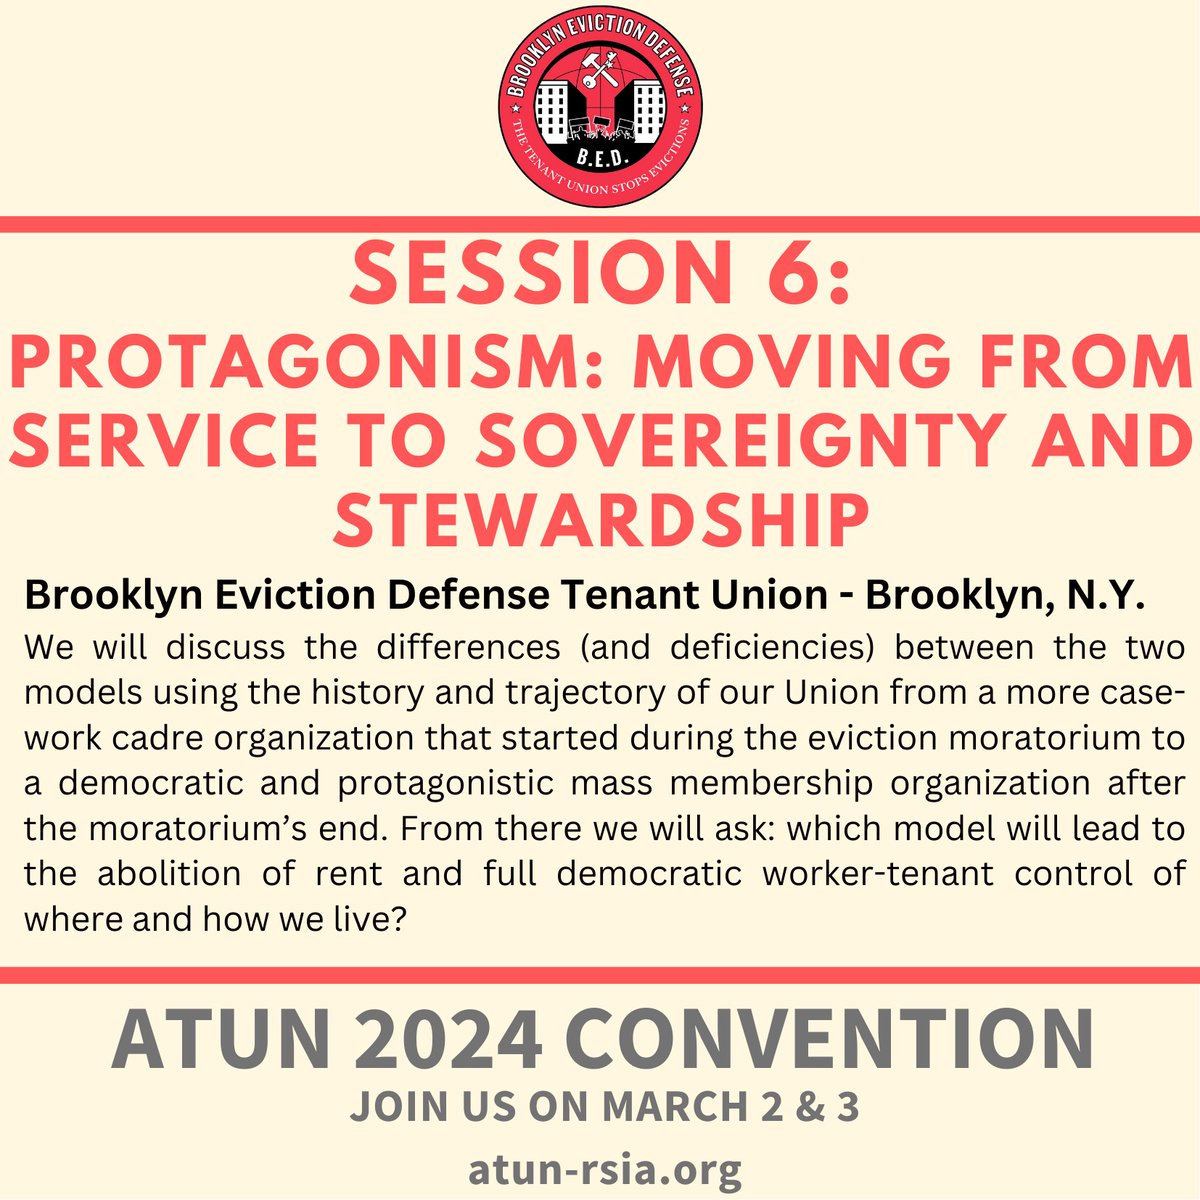 Session 6 of our convention this coming weekend is a presentation on organizing models by @BrooklynDefense Register: bit.ly/atun2024 More info: atun-rsia.org/2024convention